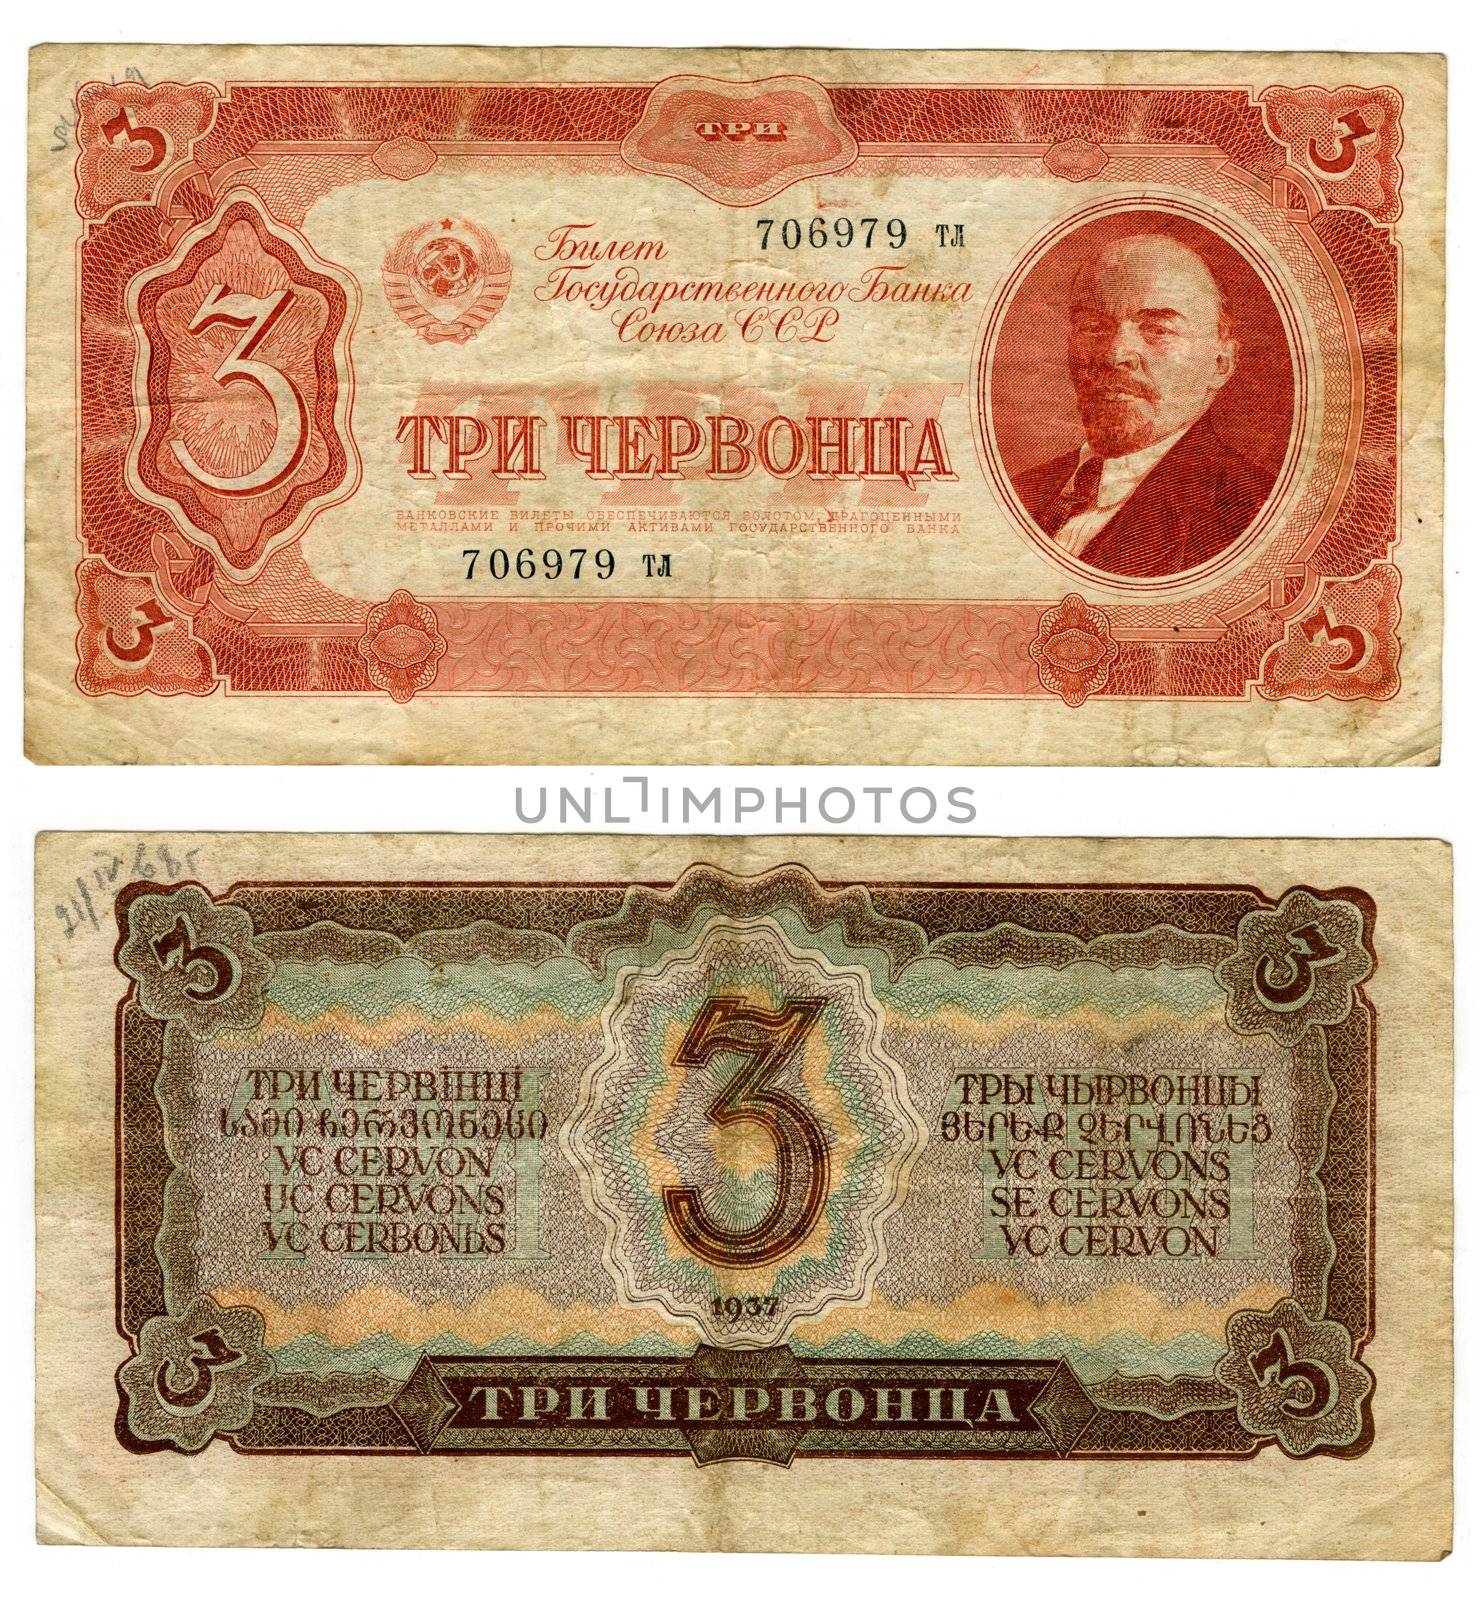 30 old Soviet rubles (obverse and reverse)